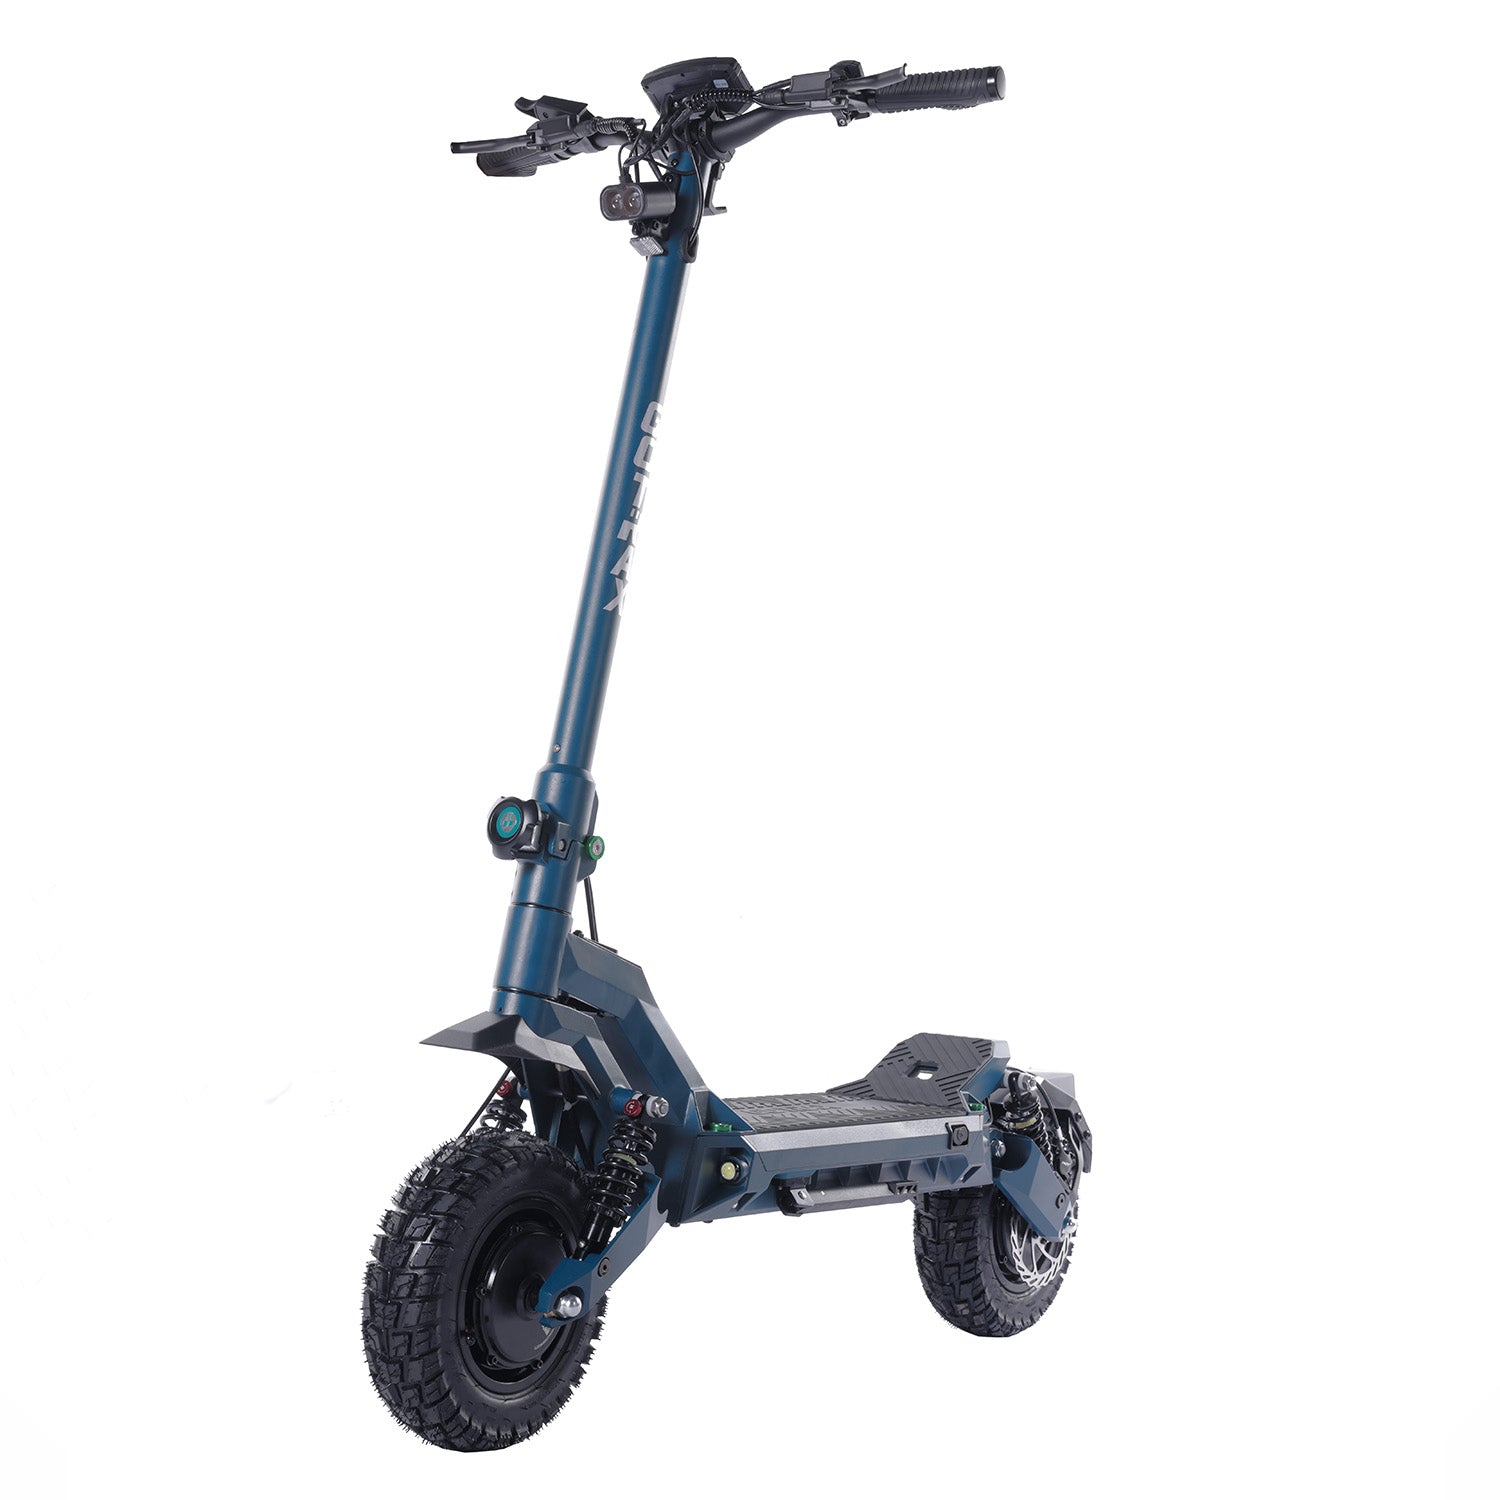  Electric Scooter Upgraded 450W Motor 8.5 Solid Tires Up to 17  Miles Long Range for Adults - 19 Mph Max Speed,Smart APP,Dual Brake  System,Foldable Commuter E Scooter : Sports 